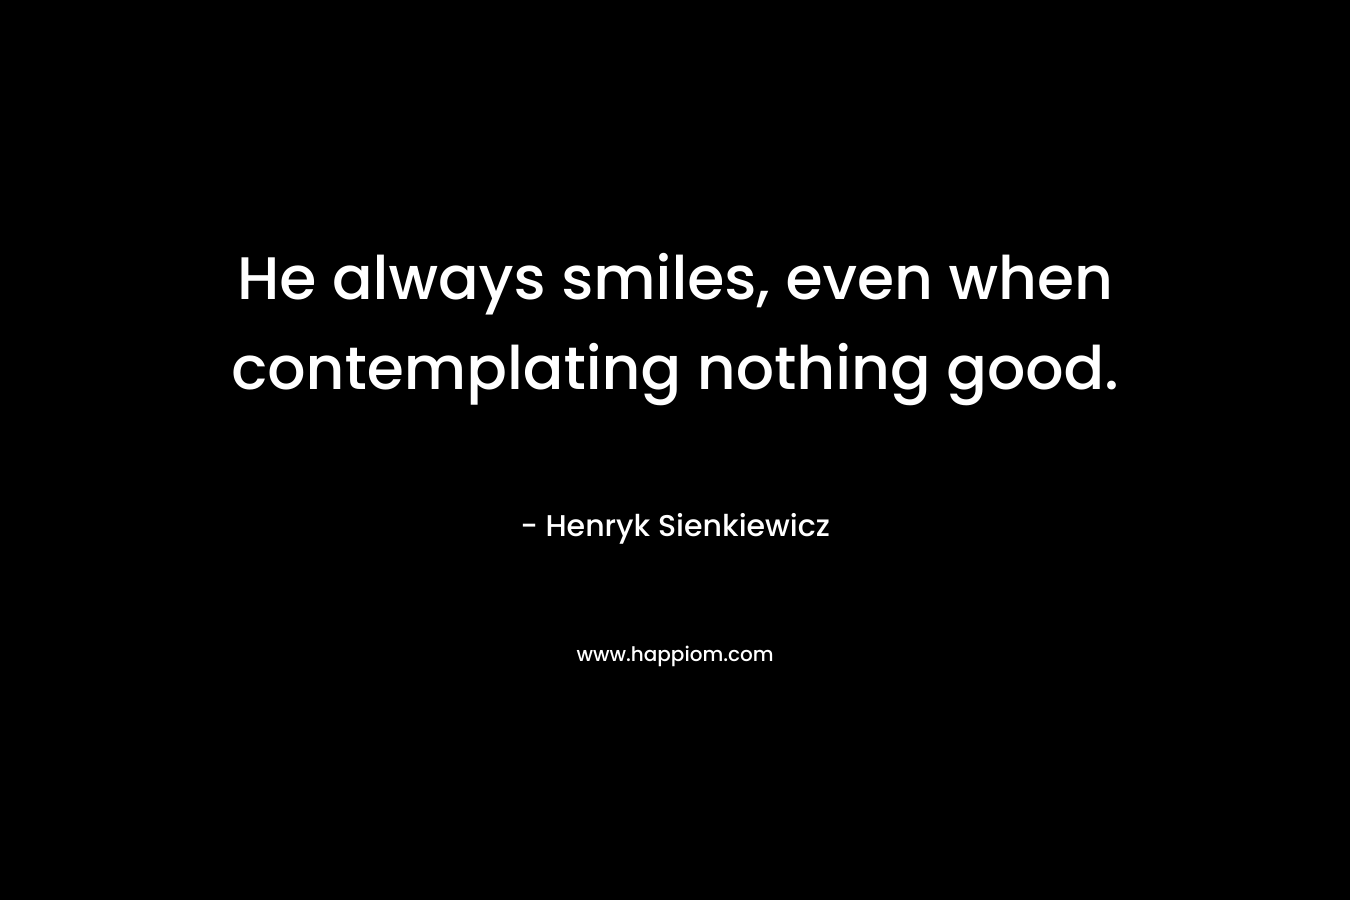 He always smiles, even when contemplating nothing good. – Henryk Sienkiewicz